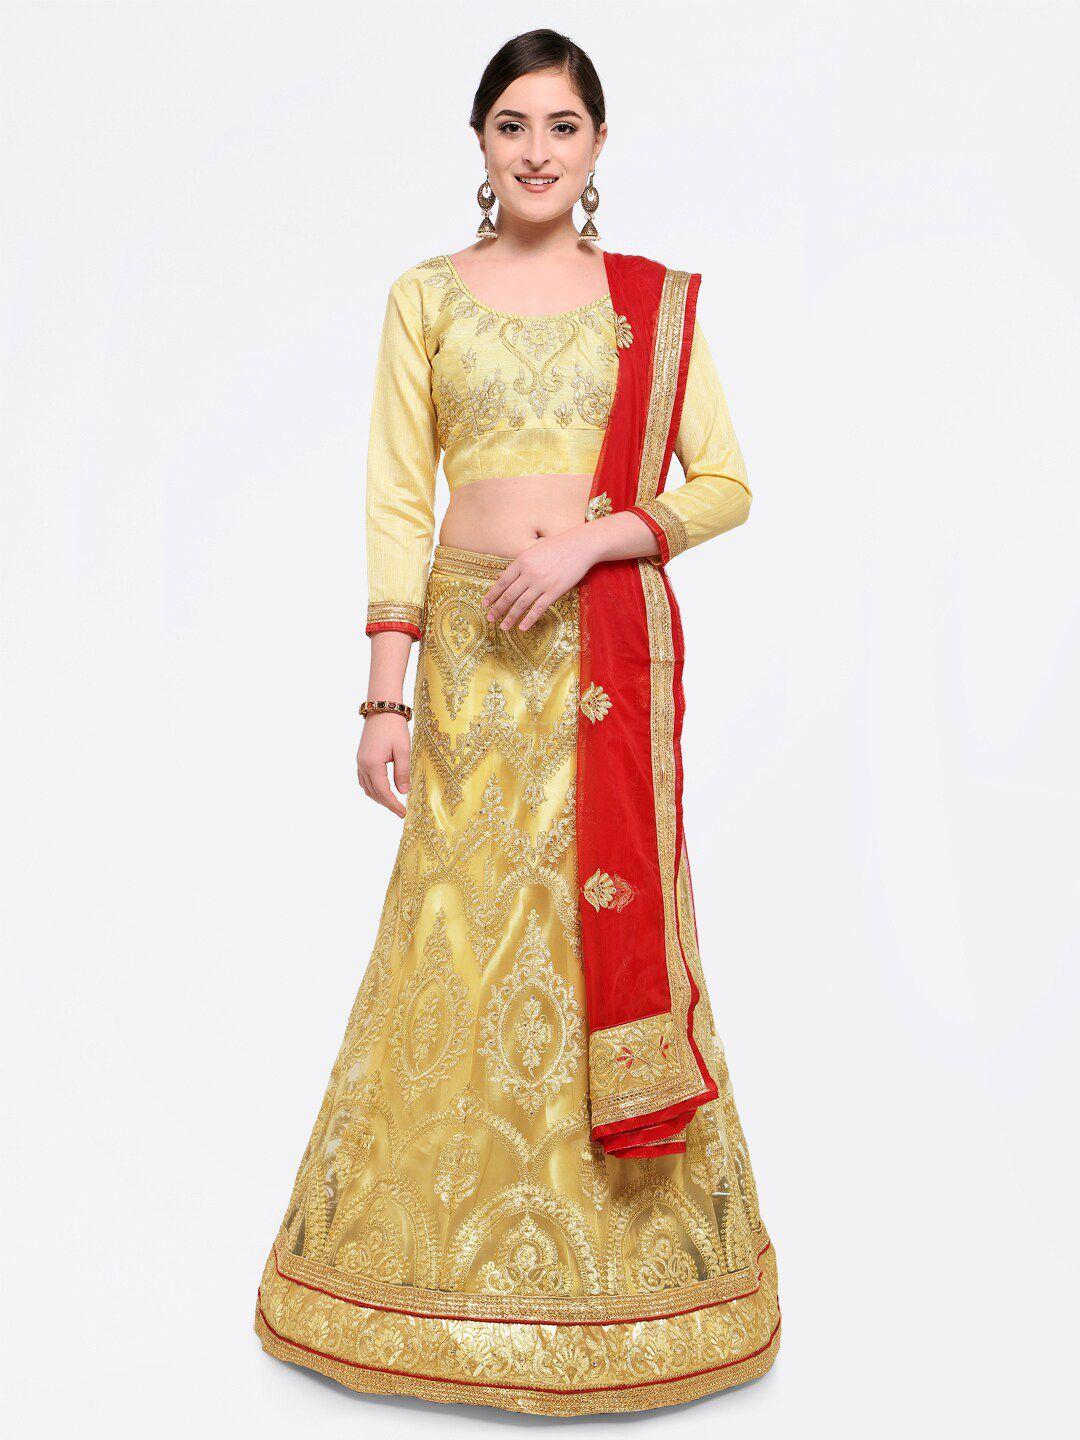 MANVAA Beige & Red Embroidered Semi-Stitched Lehenga & Unstitched Blouse With Dupatta